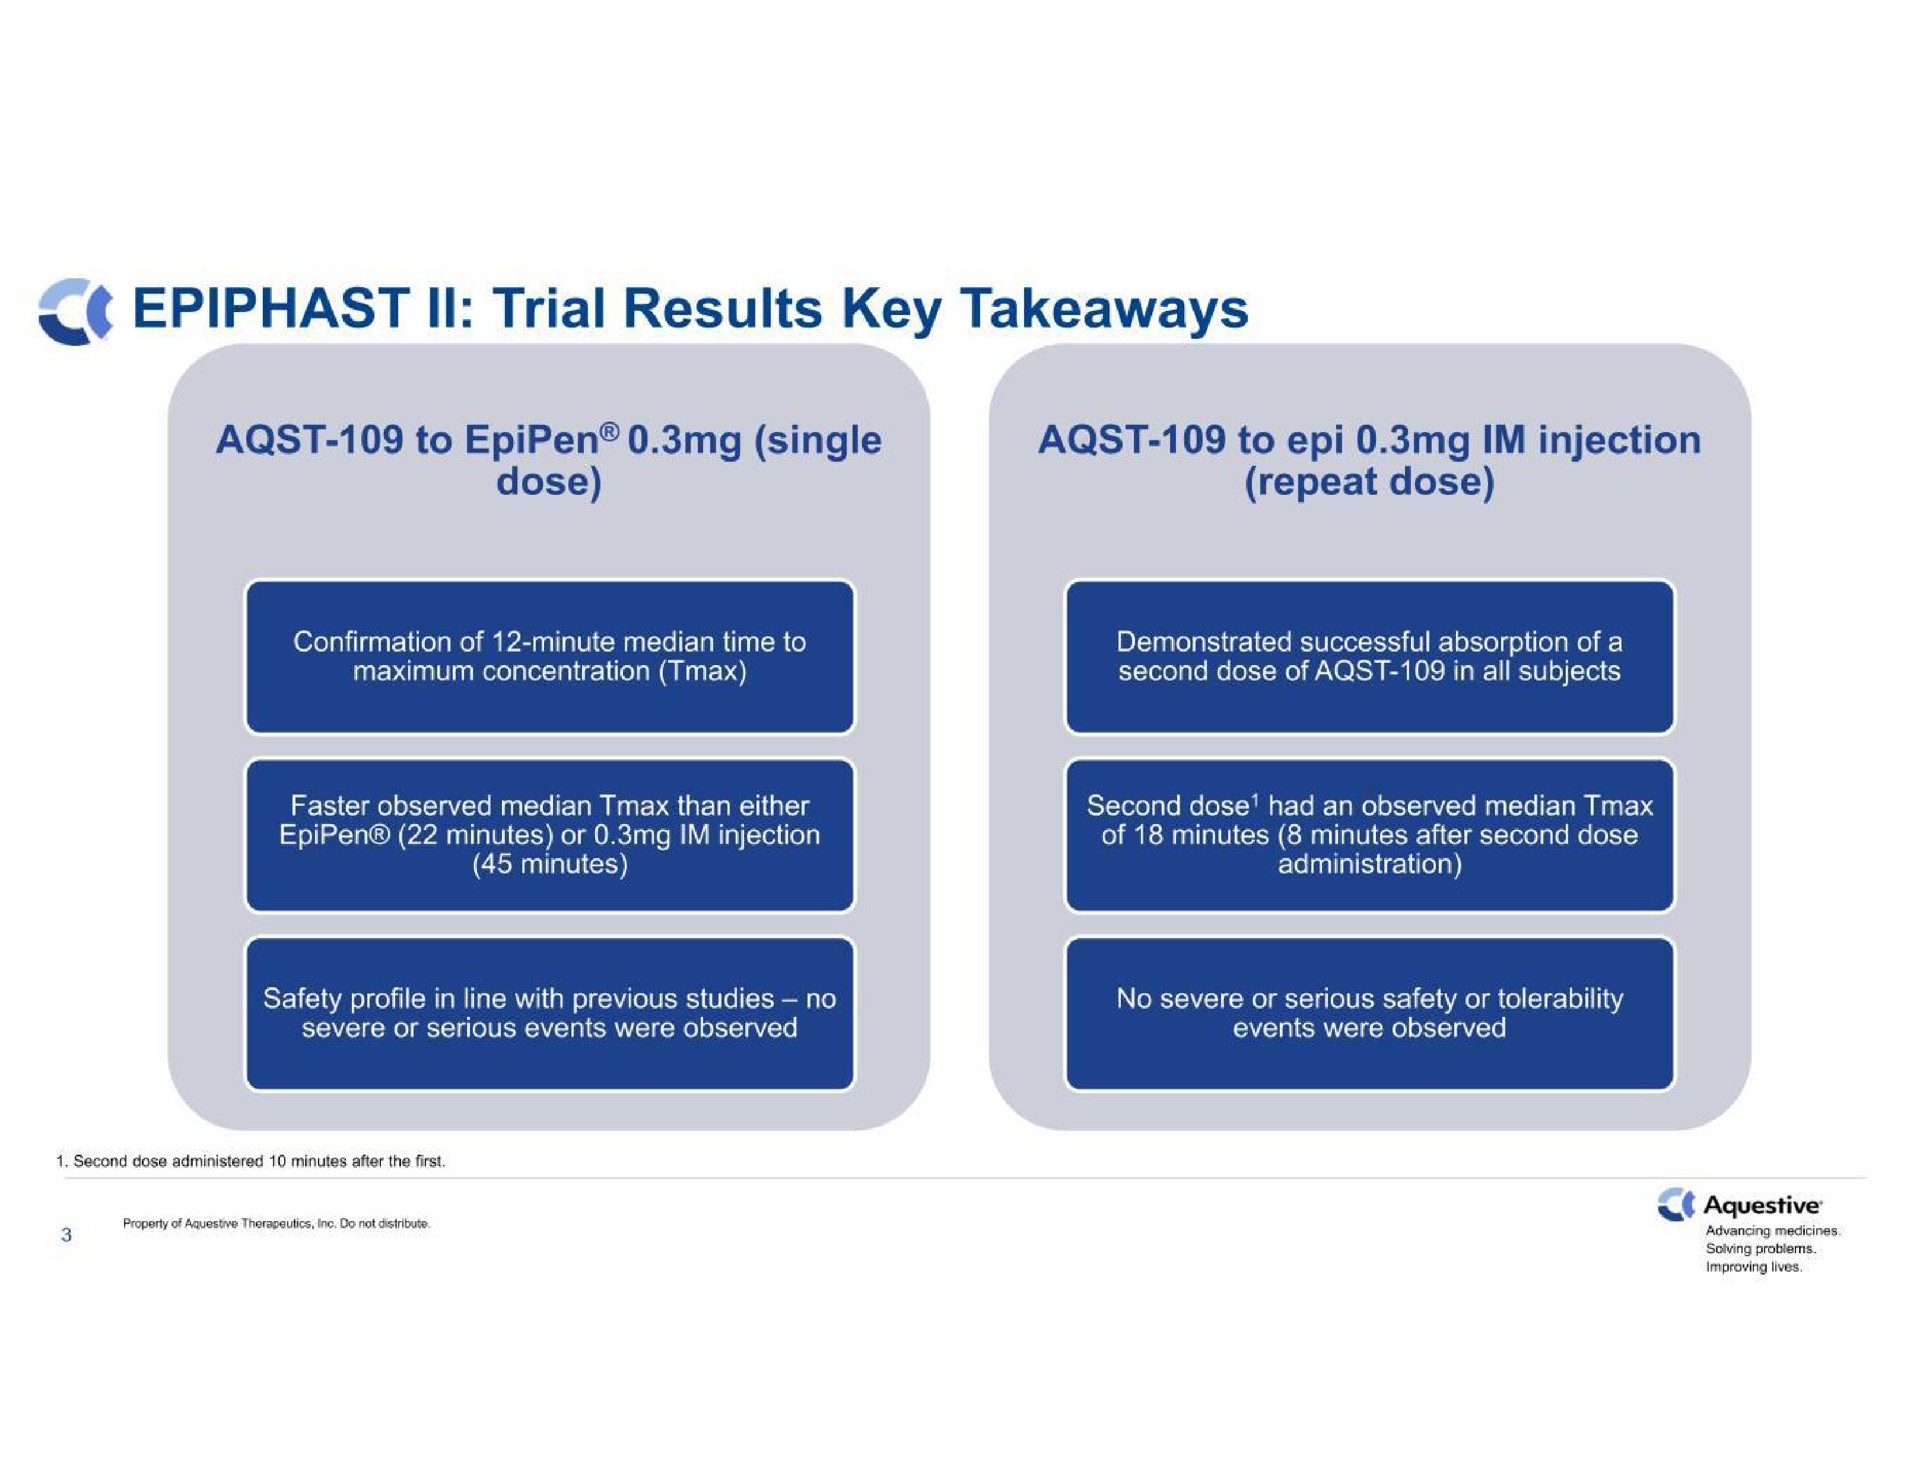 trial results key to single dose to injection repeat dose | Aquestive Therapeutics